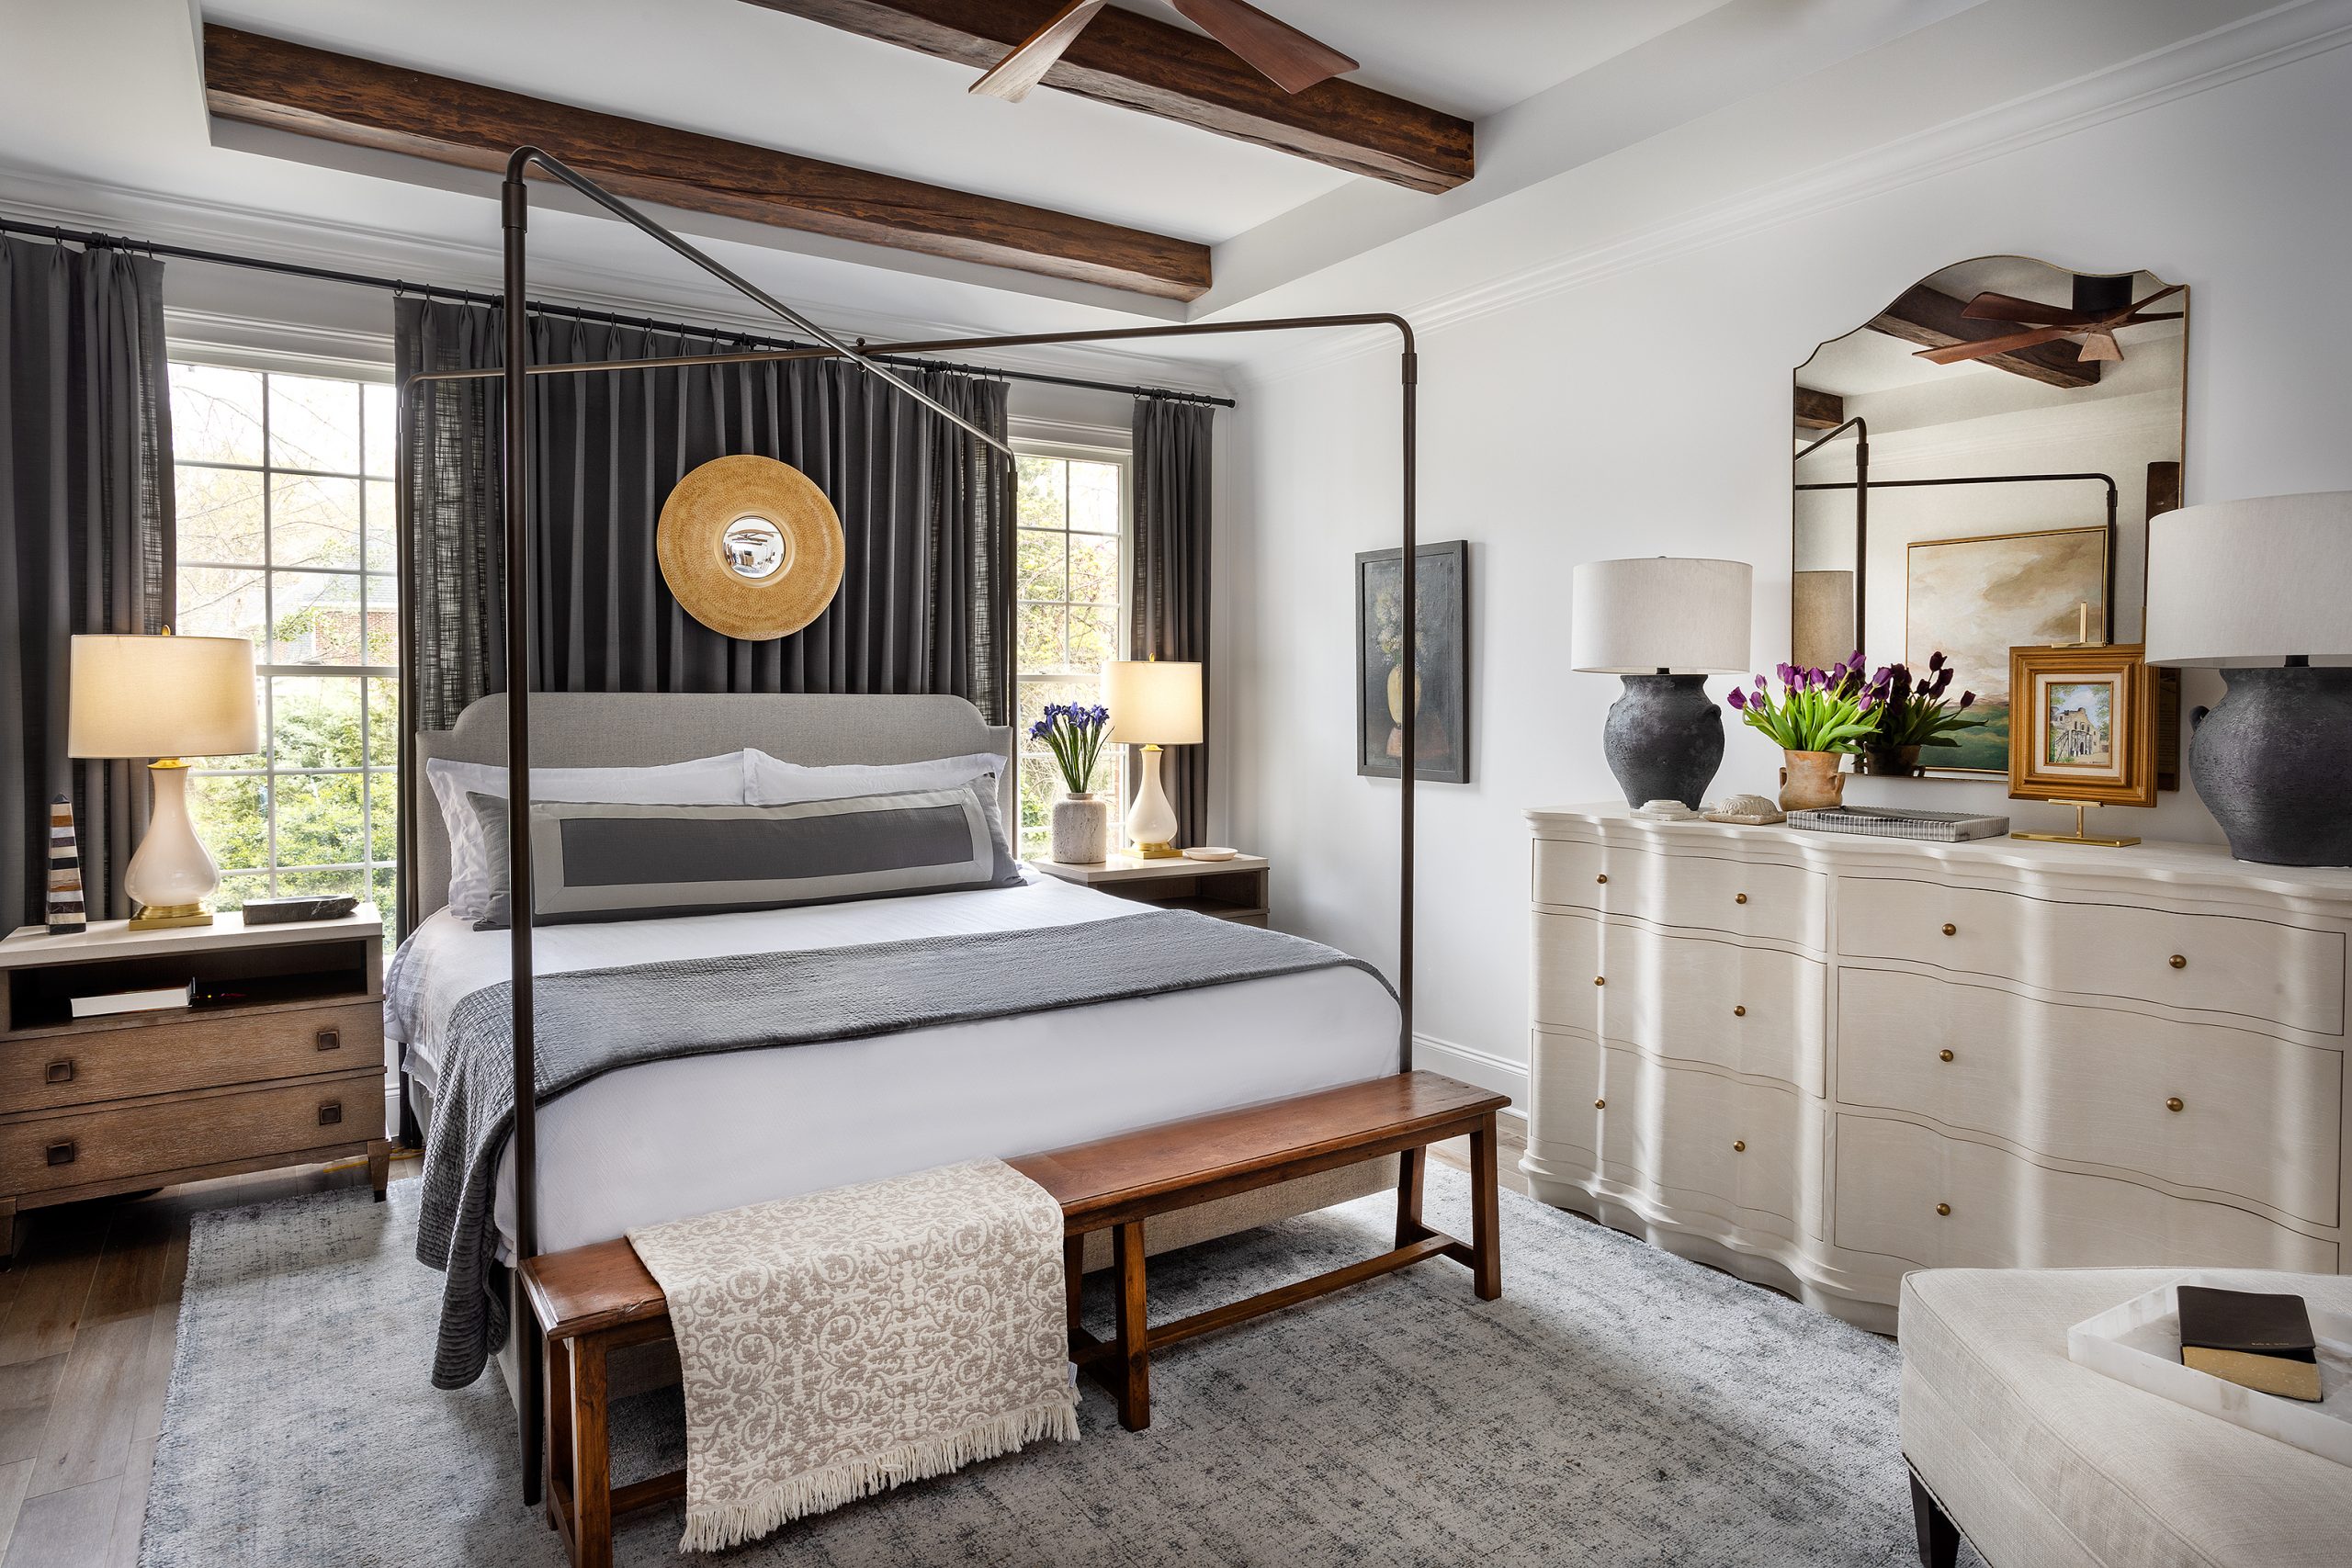 Dark gray drapes extend across the entire headboard wall behind the Palmers’ iron canopy bed, and dark wooden beams extend above the bed, recessed in the tray ceiling. The space is warm and inviting.